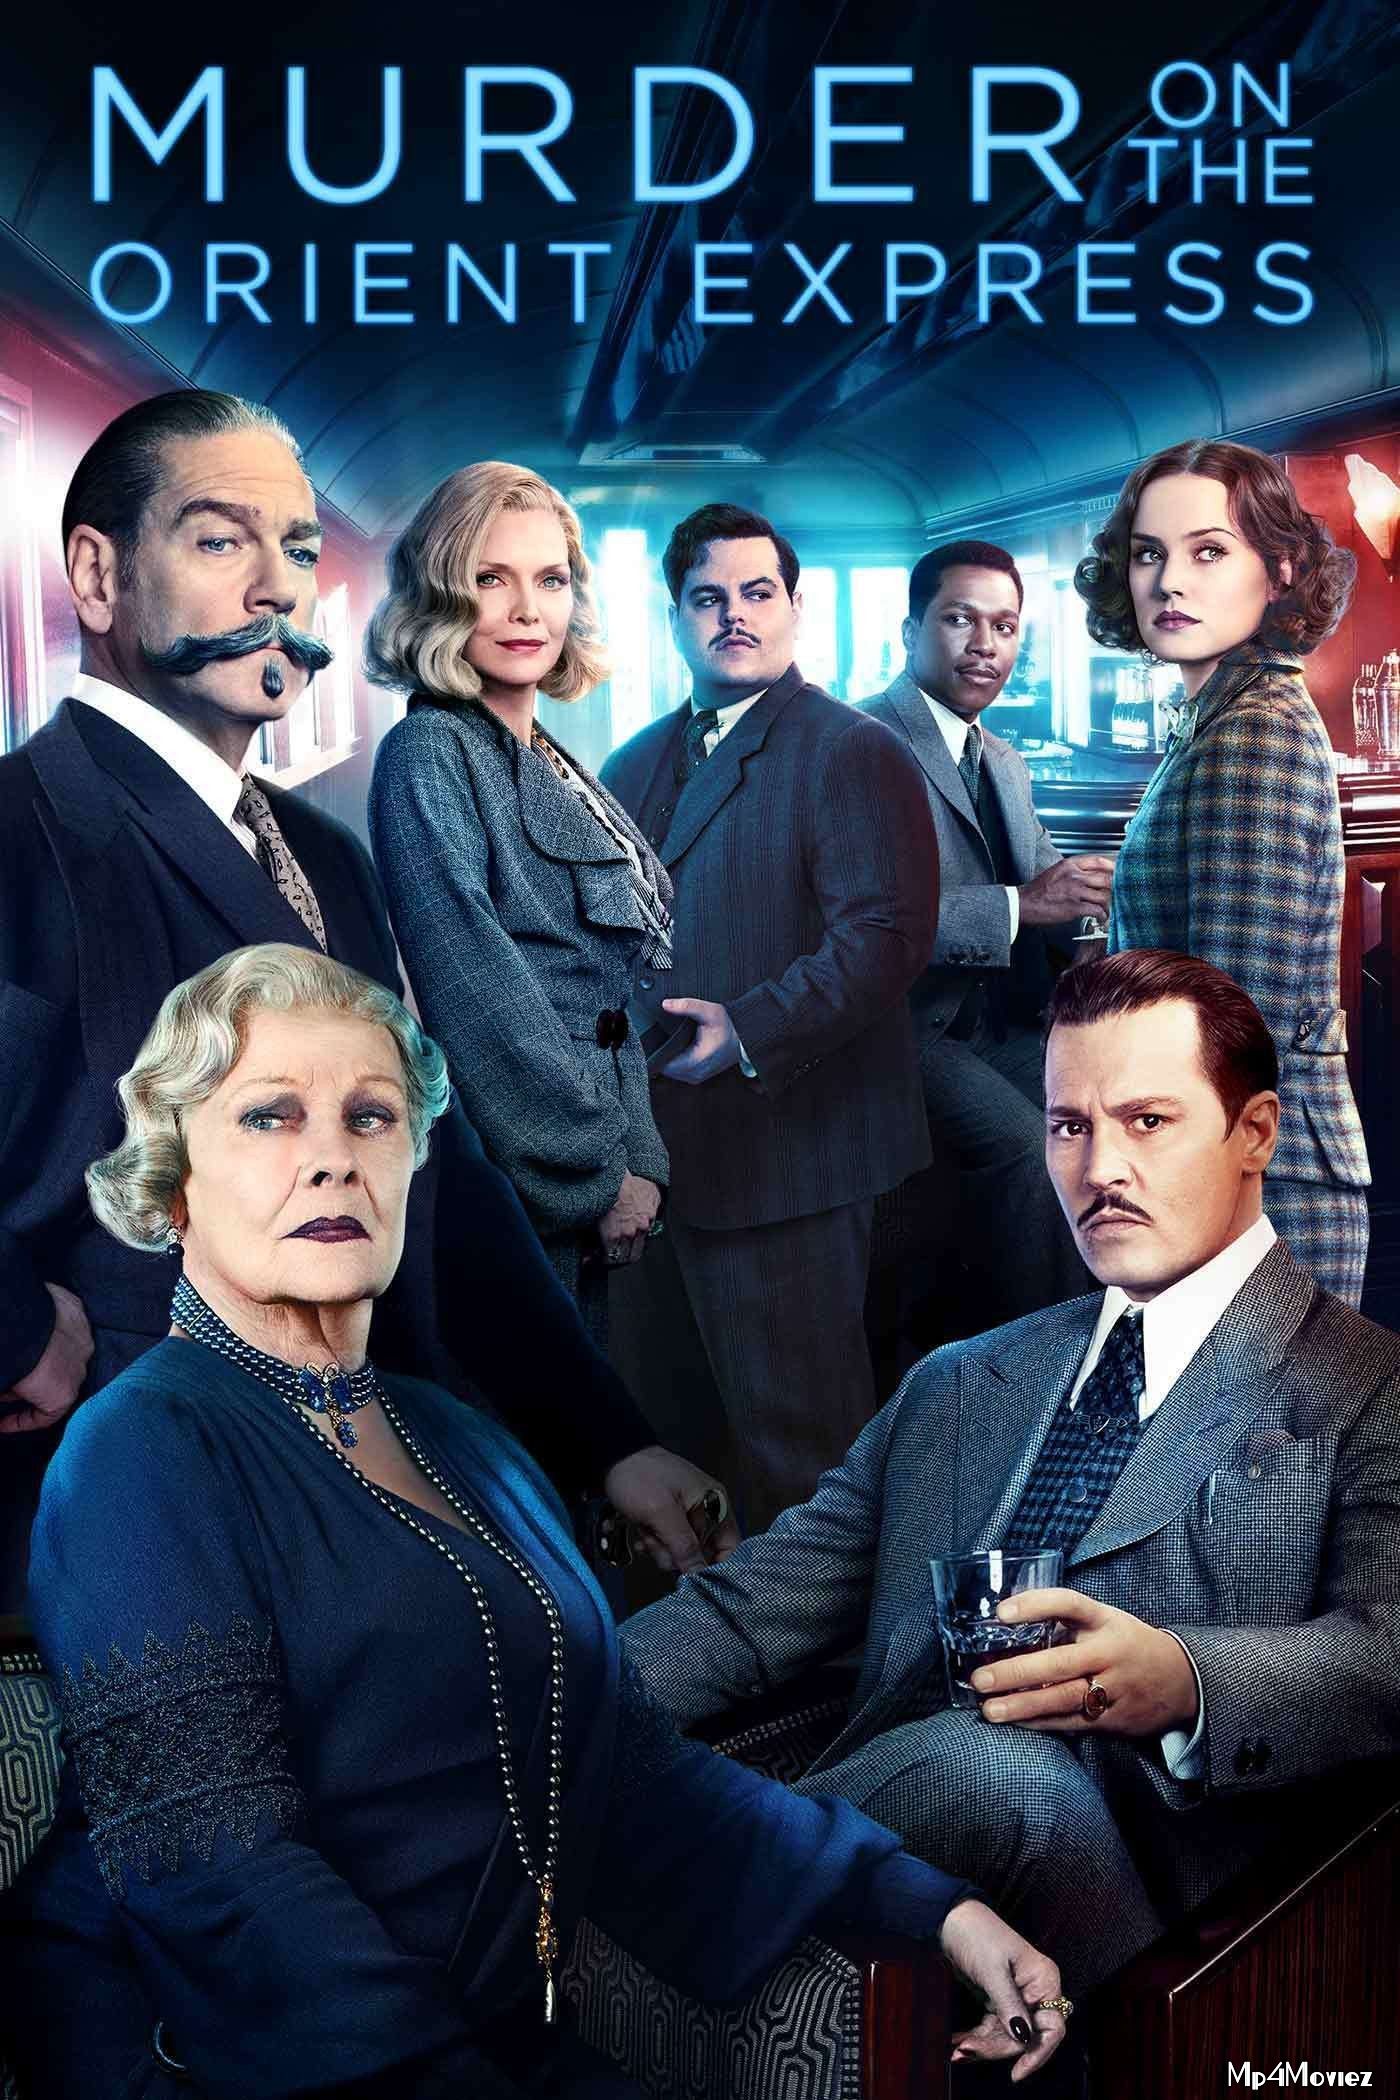 Murder on the Orient Express 2017 Hindi Dubbed BluRay download full movie